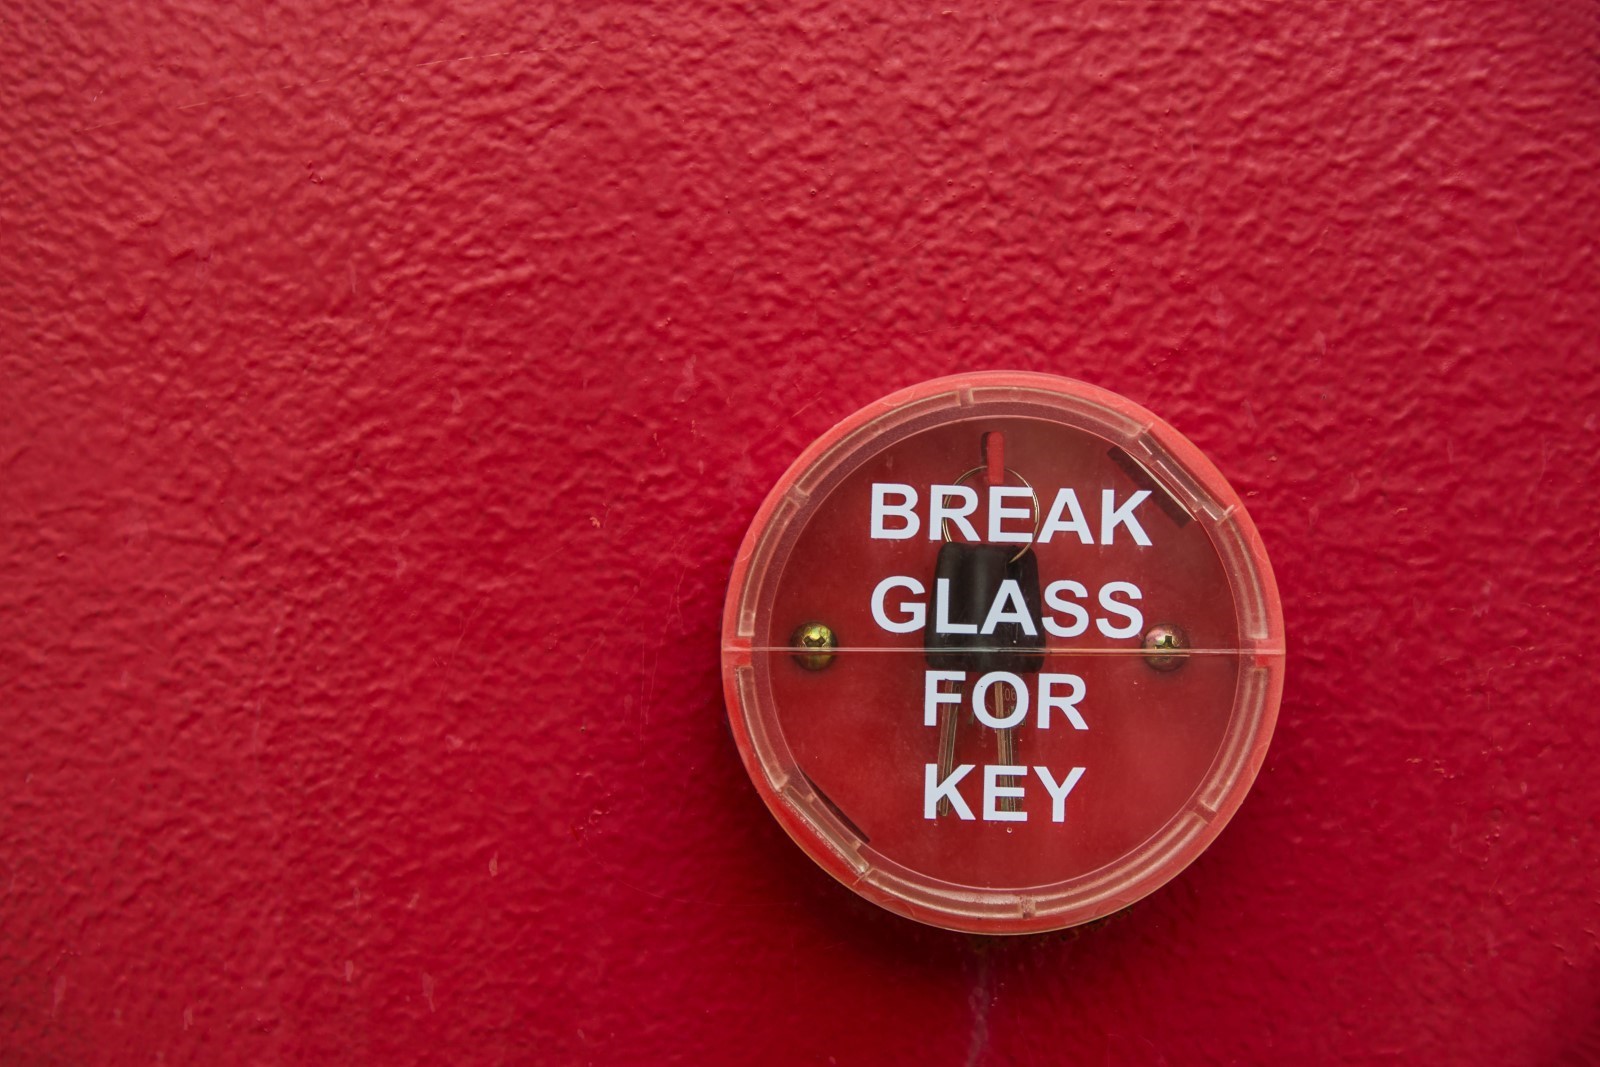 break glass for key sign on a red wall